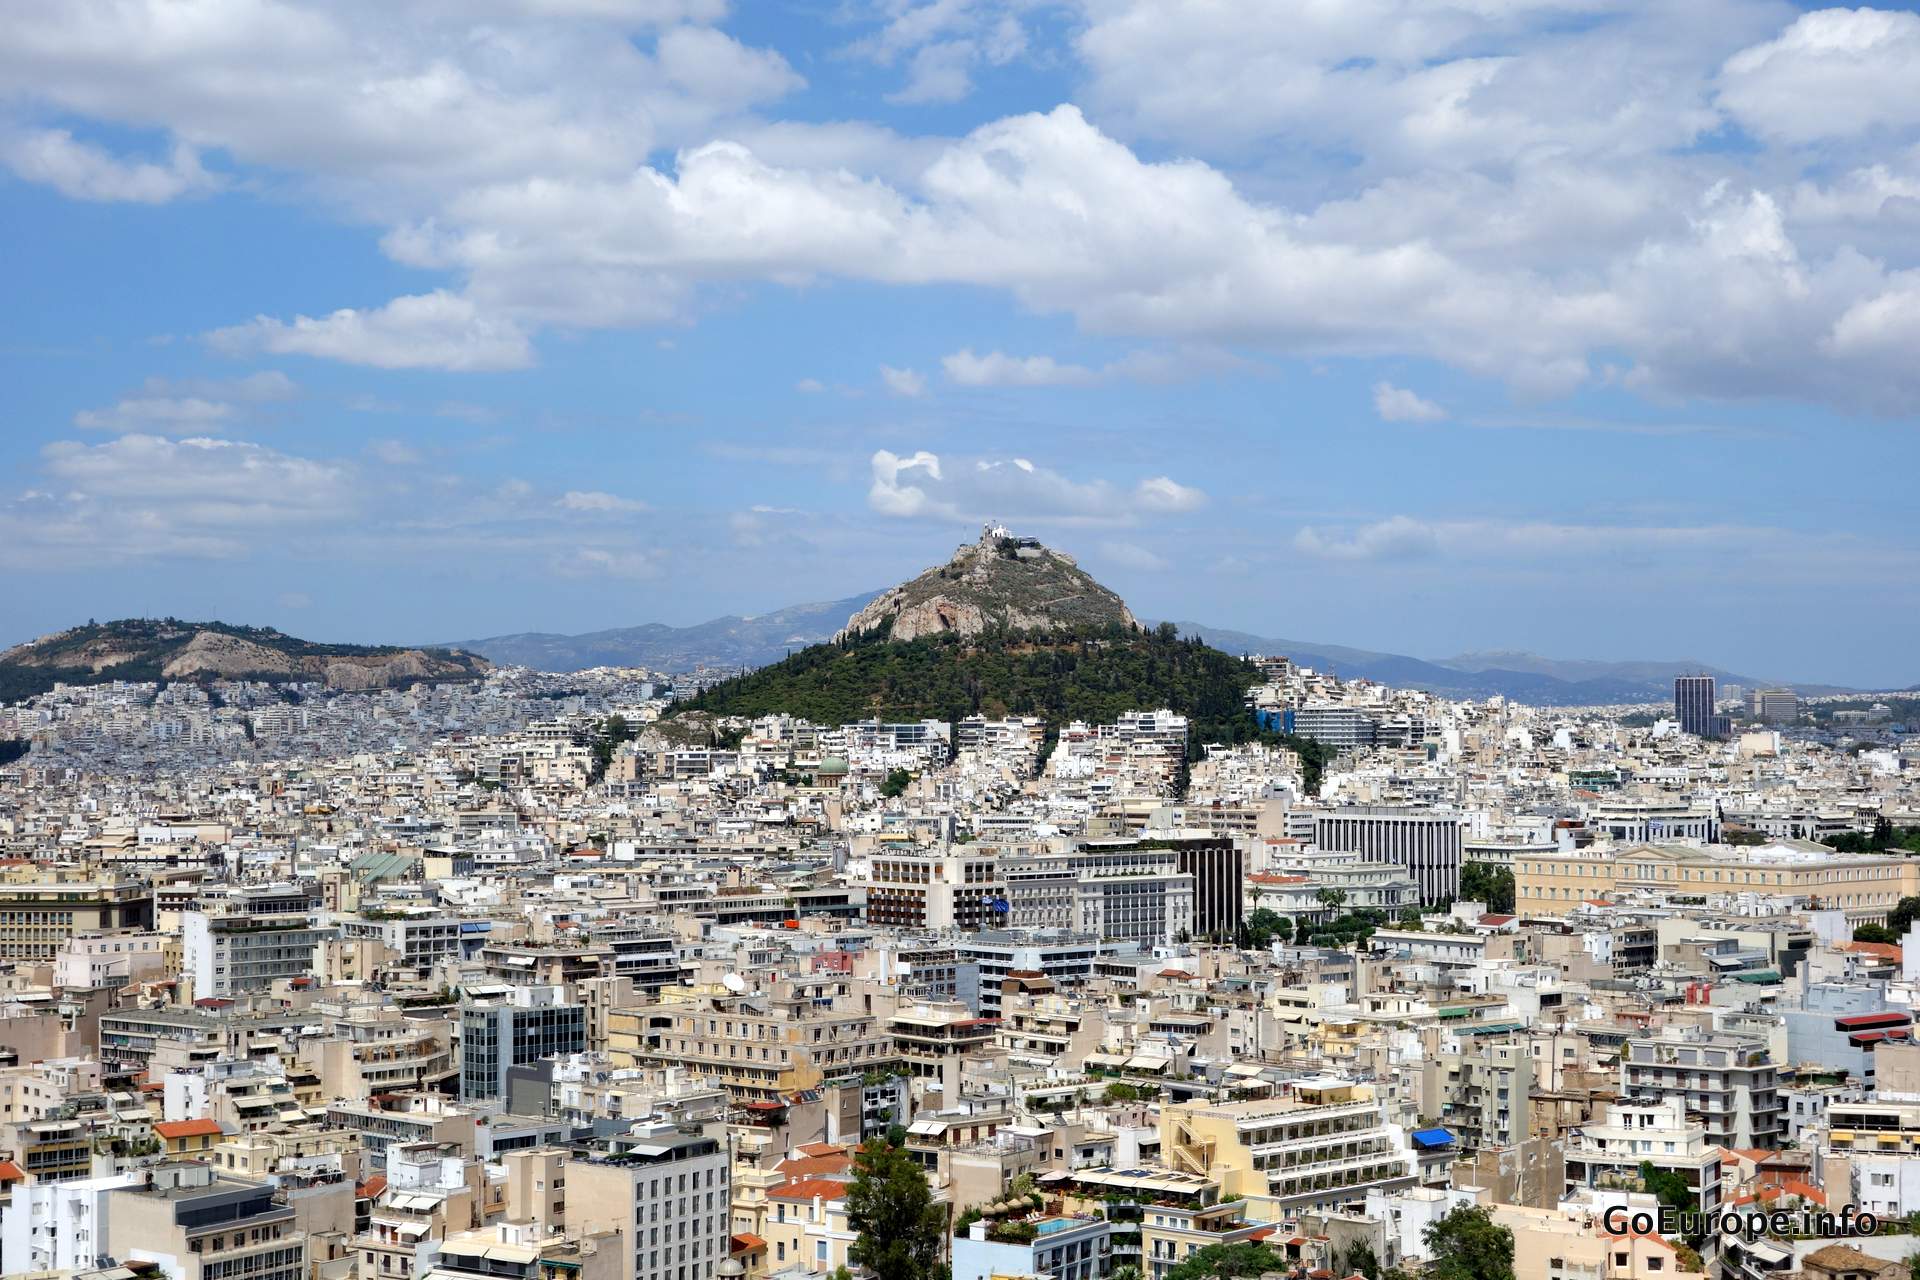 View from the Akropolis.